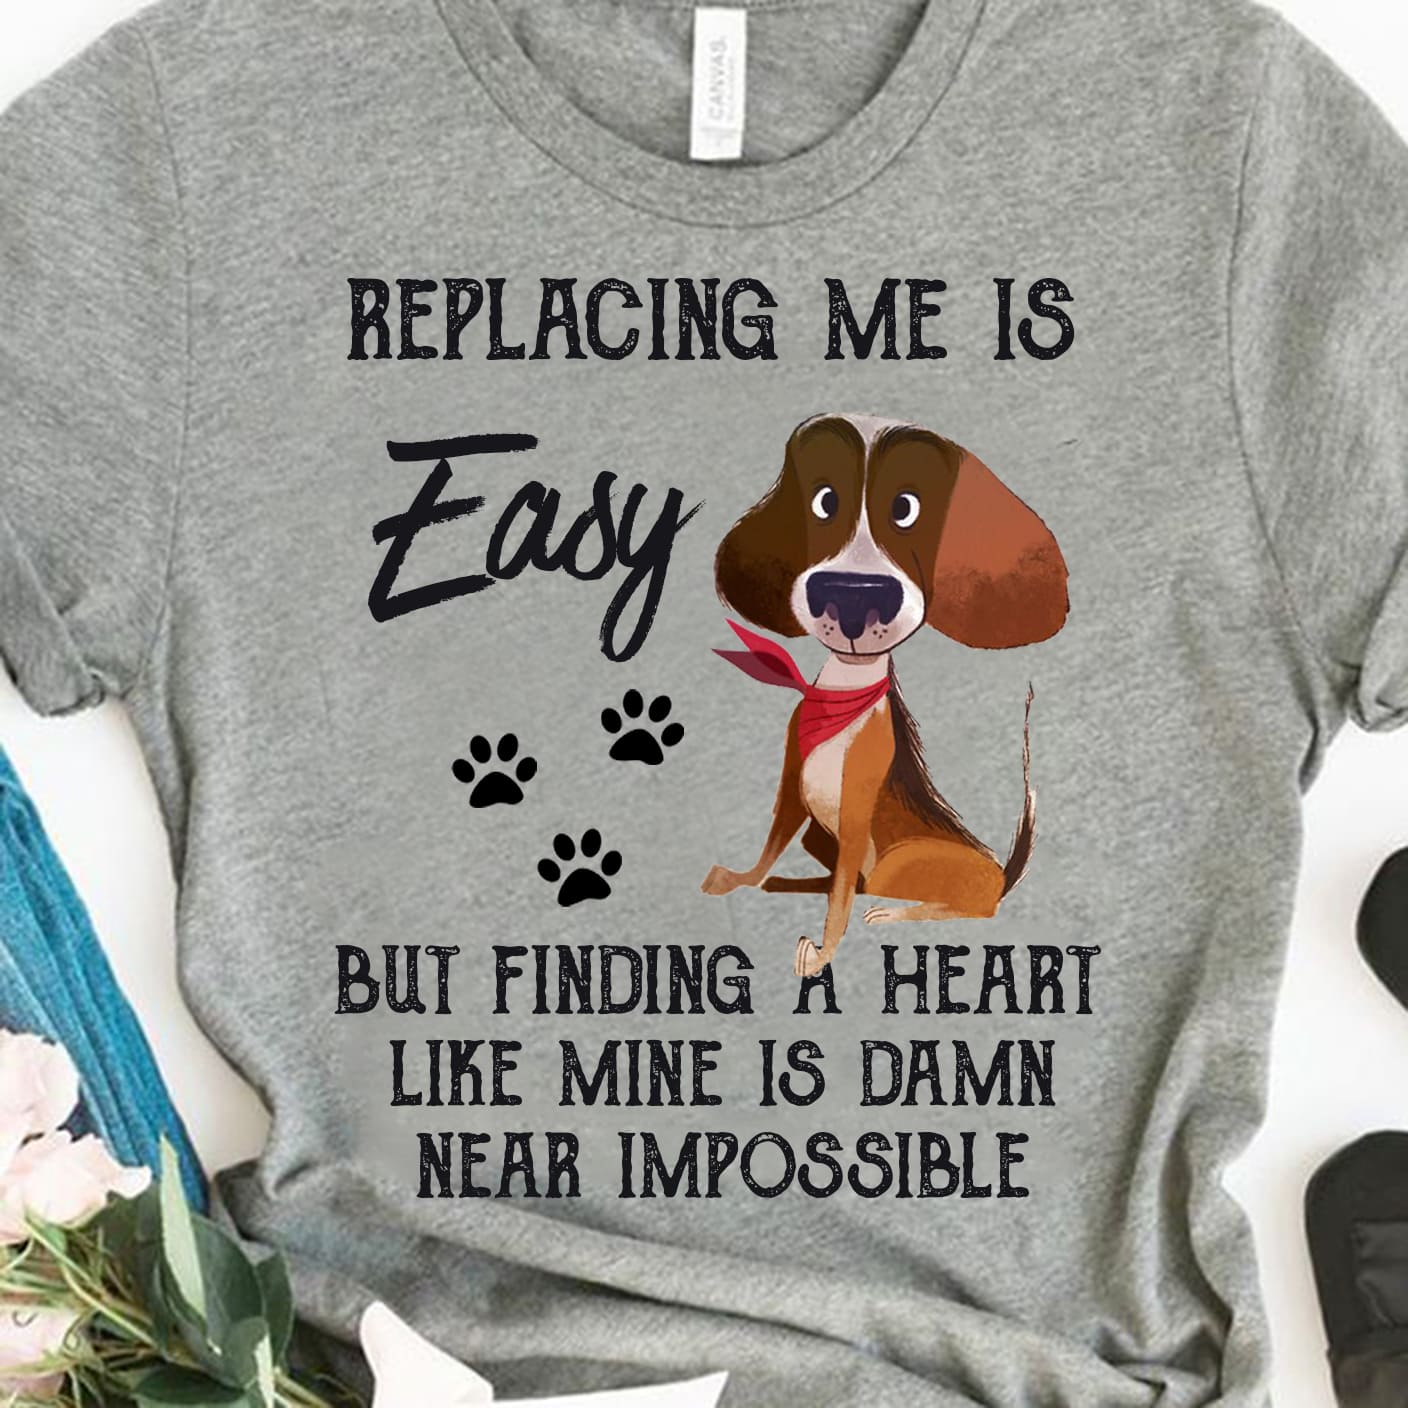 Funny Dog Graphic T-shirt - Replacing me is but finding a heart like mine is damn near impossible